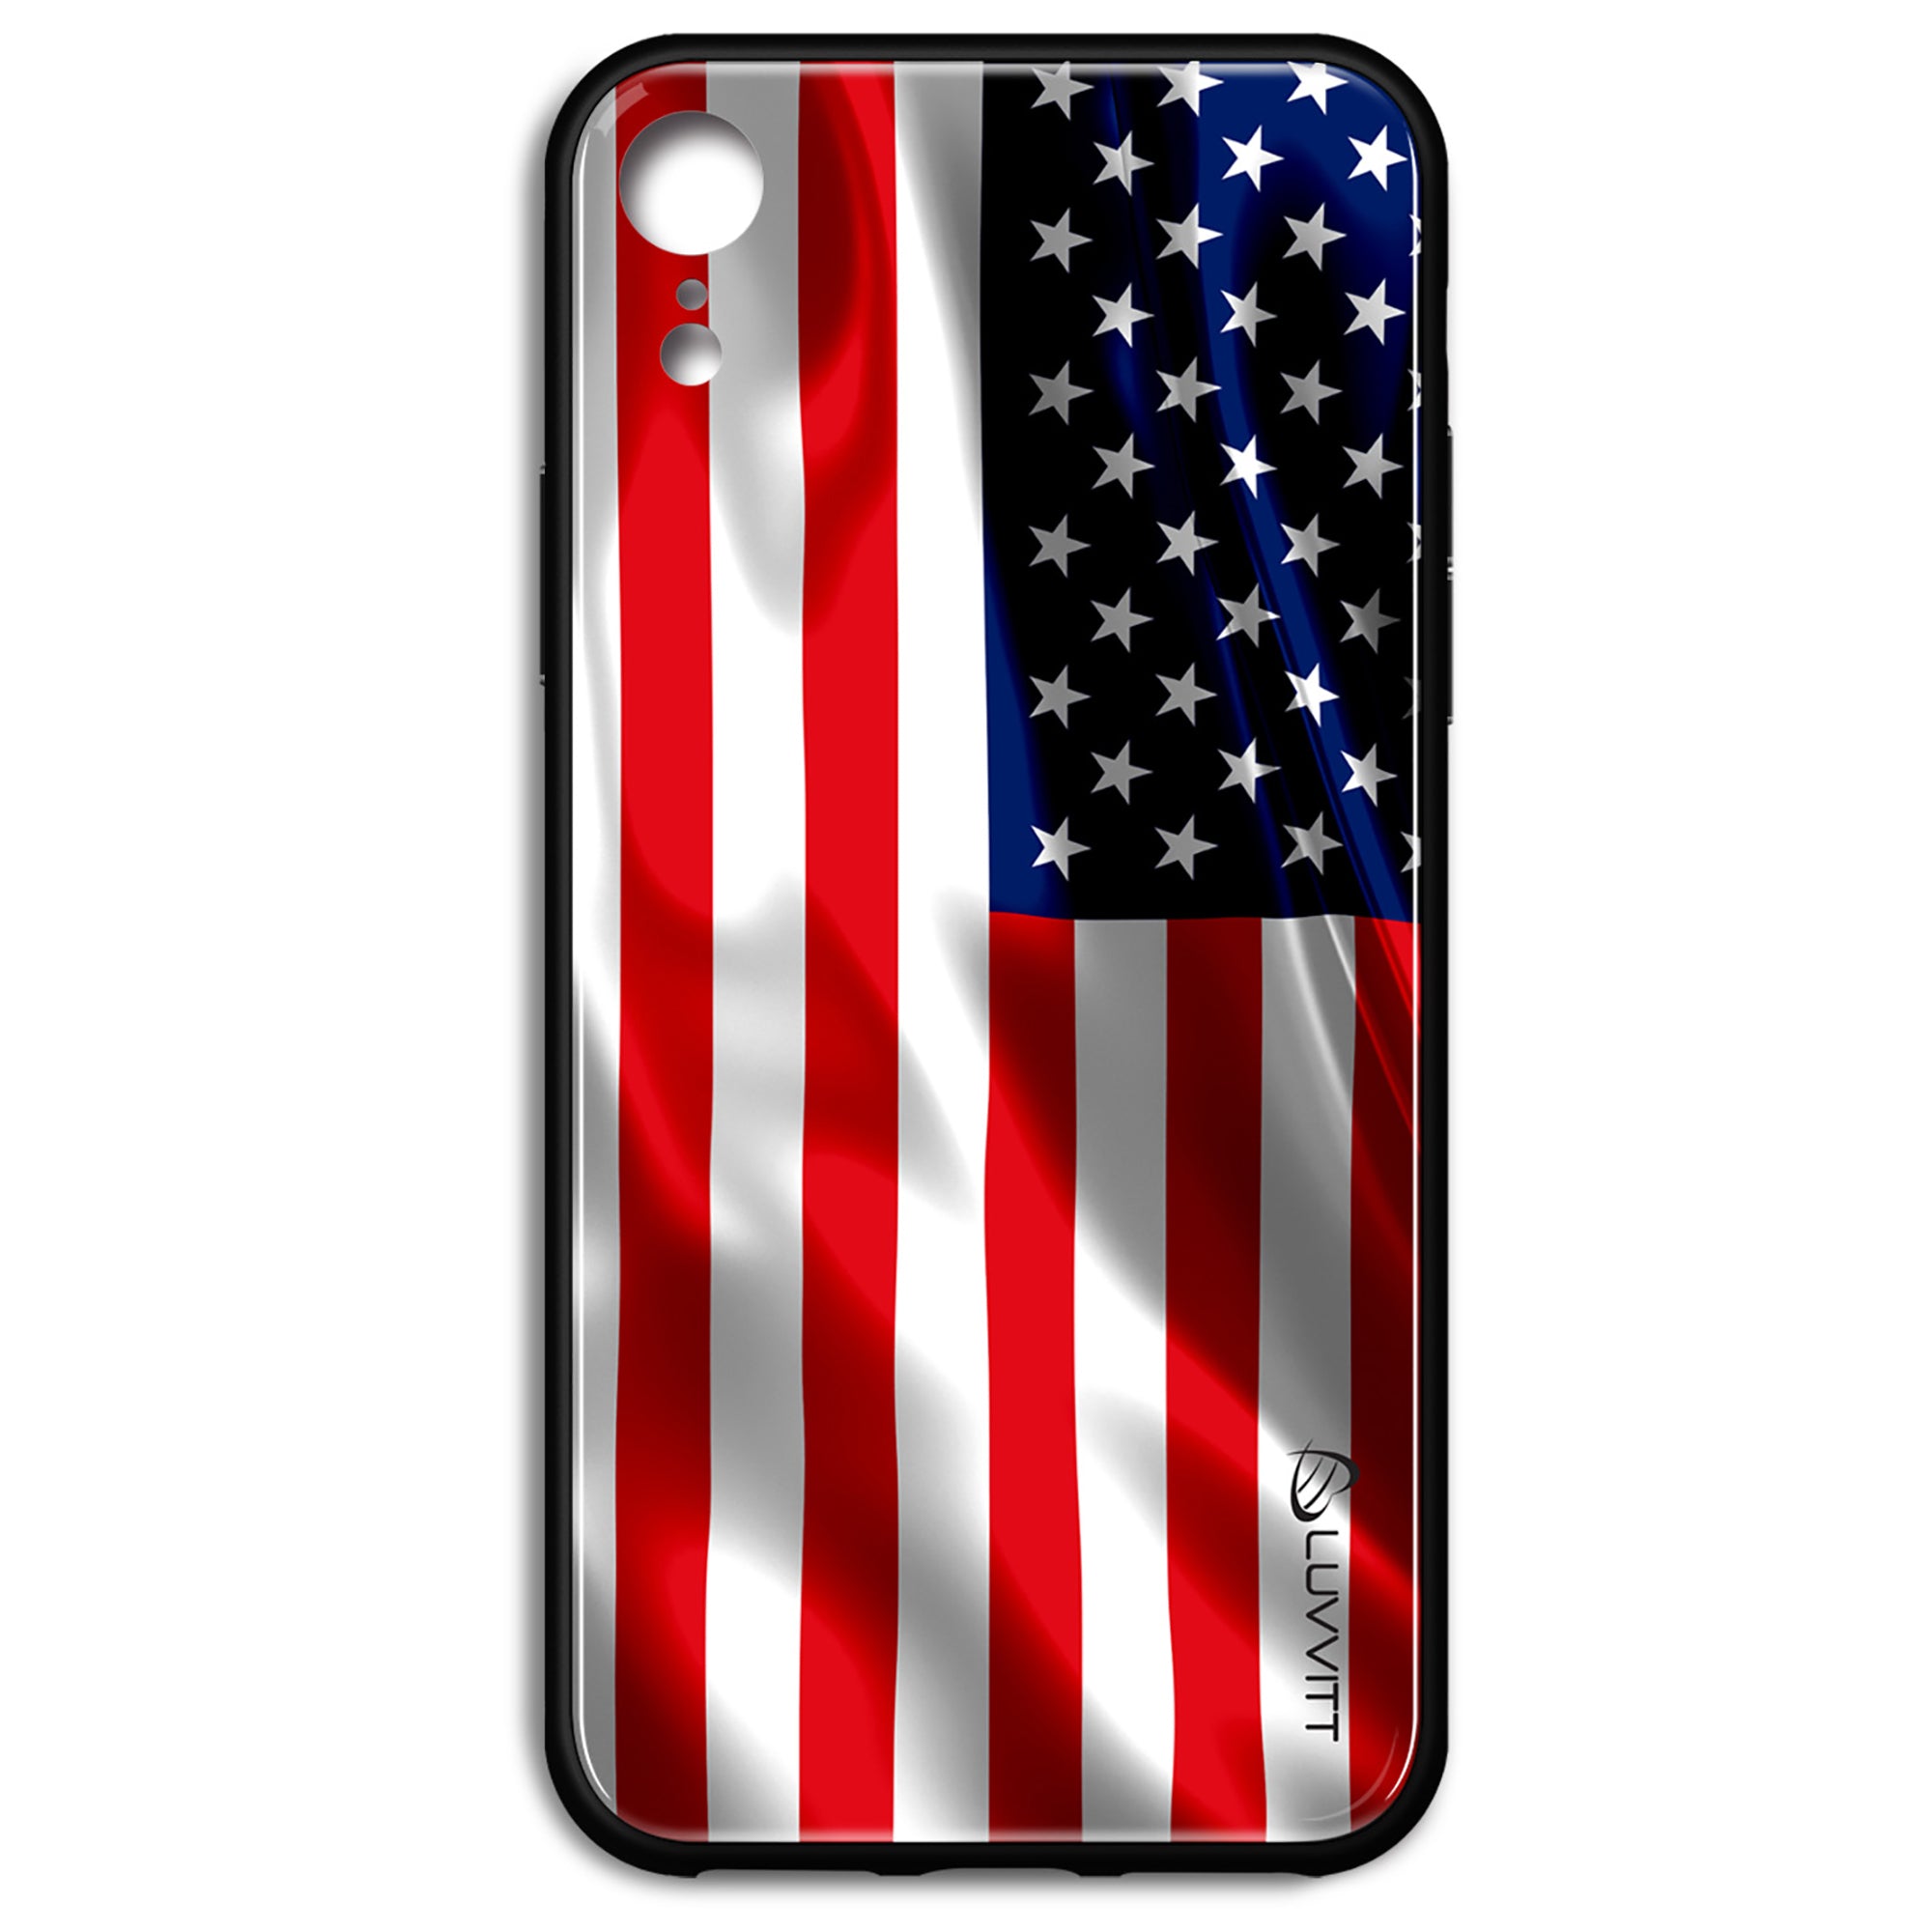 iPhone XR Case GLASS Back USA American Flag Back Cover - US United States of America